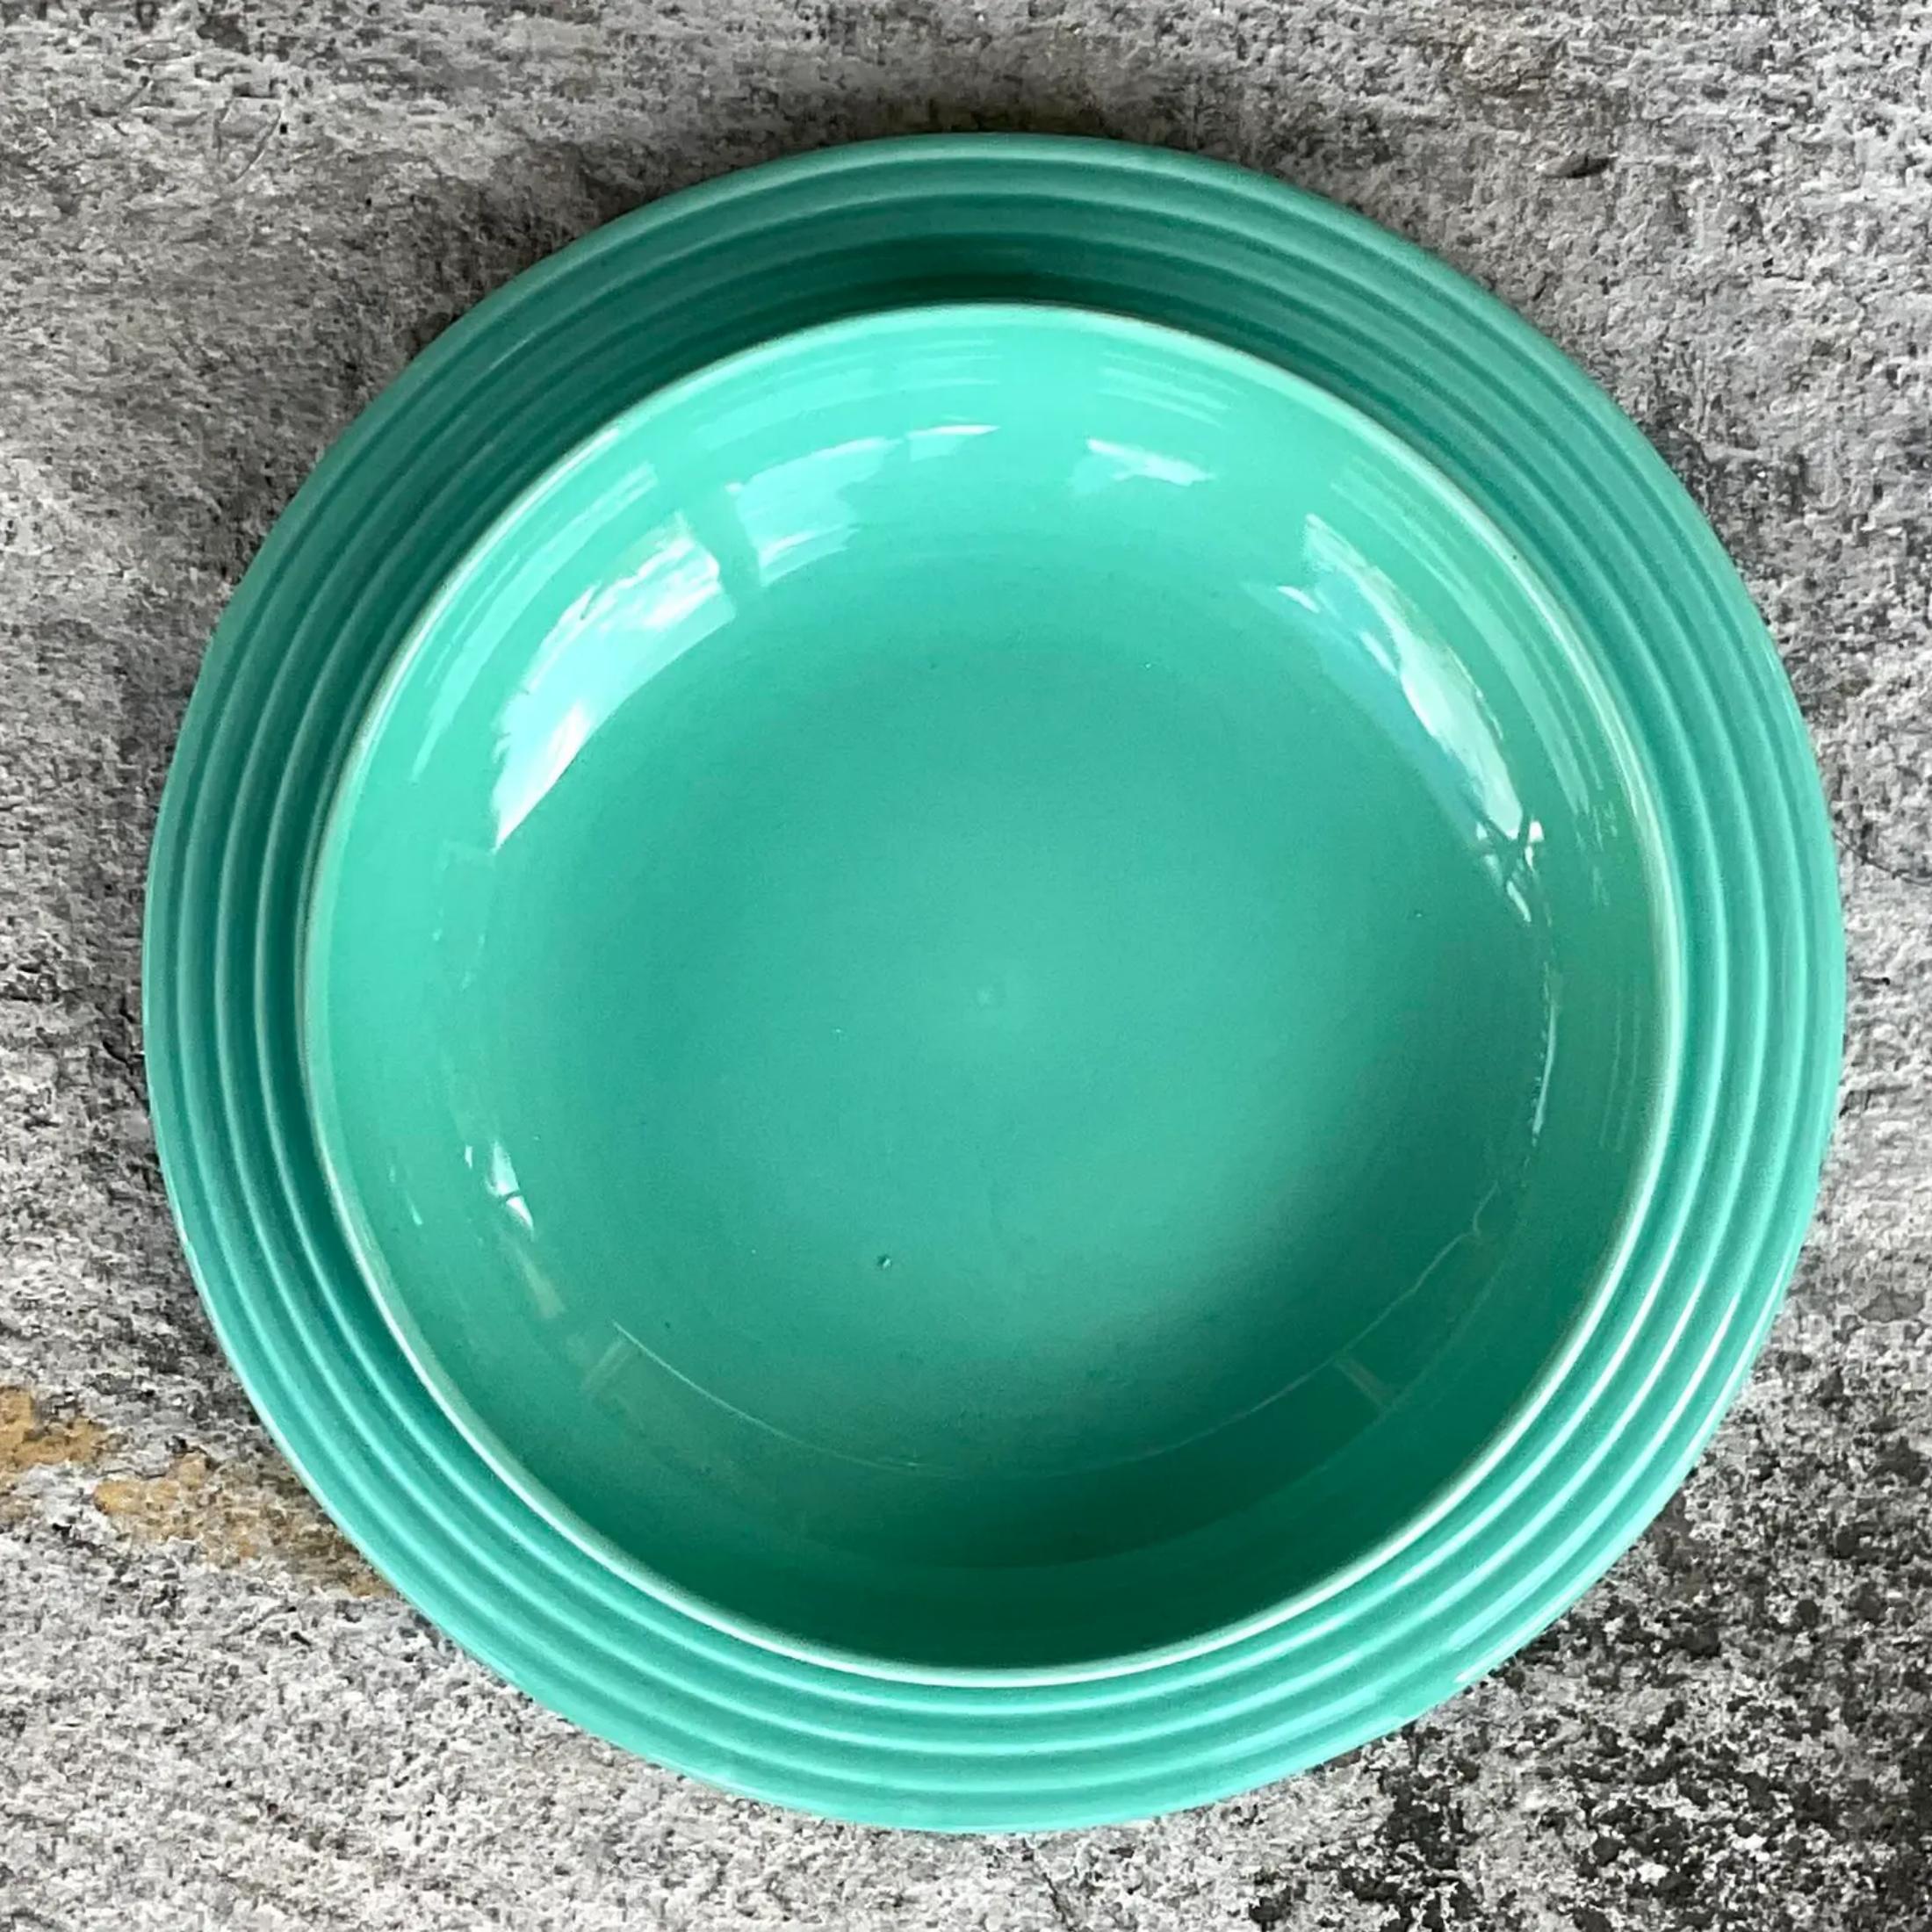 A fantastic set of glazed ceramic serving pieces. A large platter and matching serving bowl. A brilliant jade green with a ring design. Made in Portugal and stamped on the bottom. Acquired from a Palm Beach estate